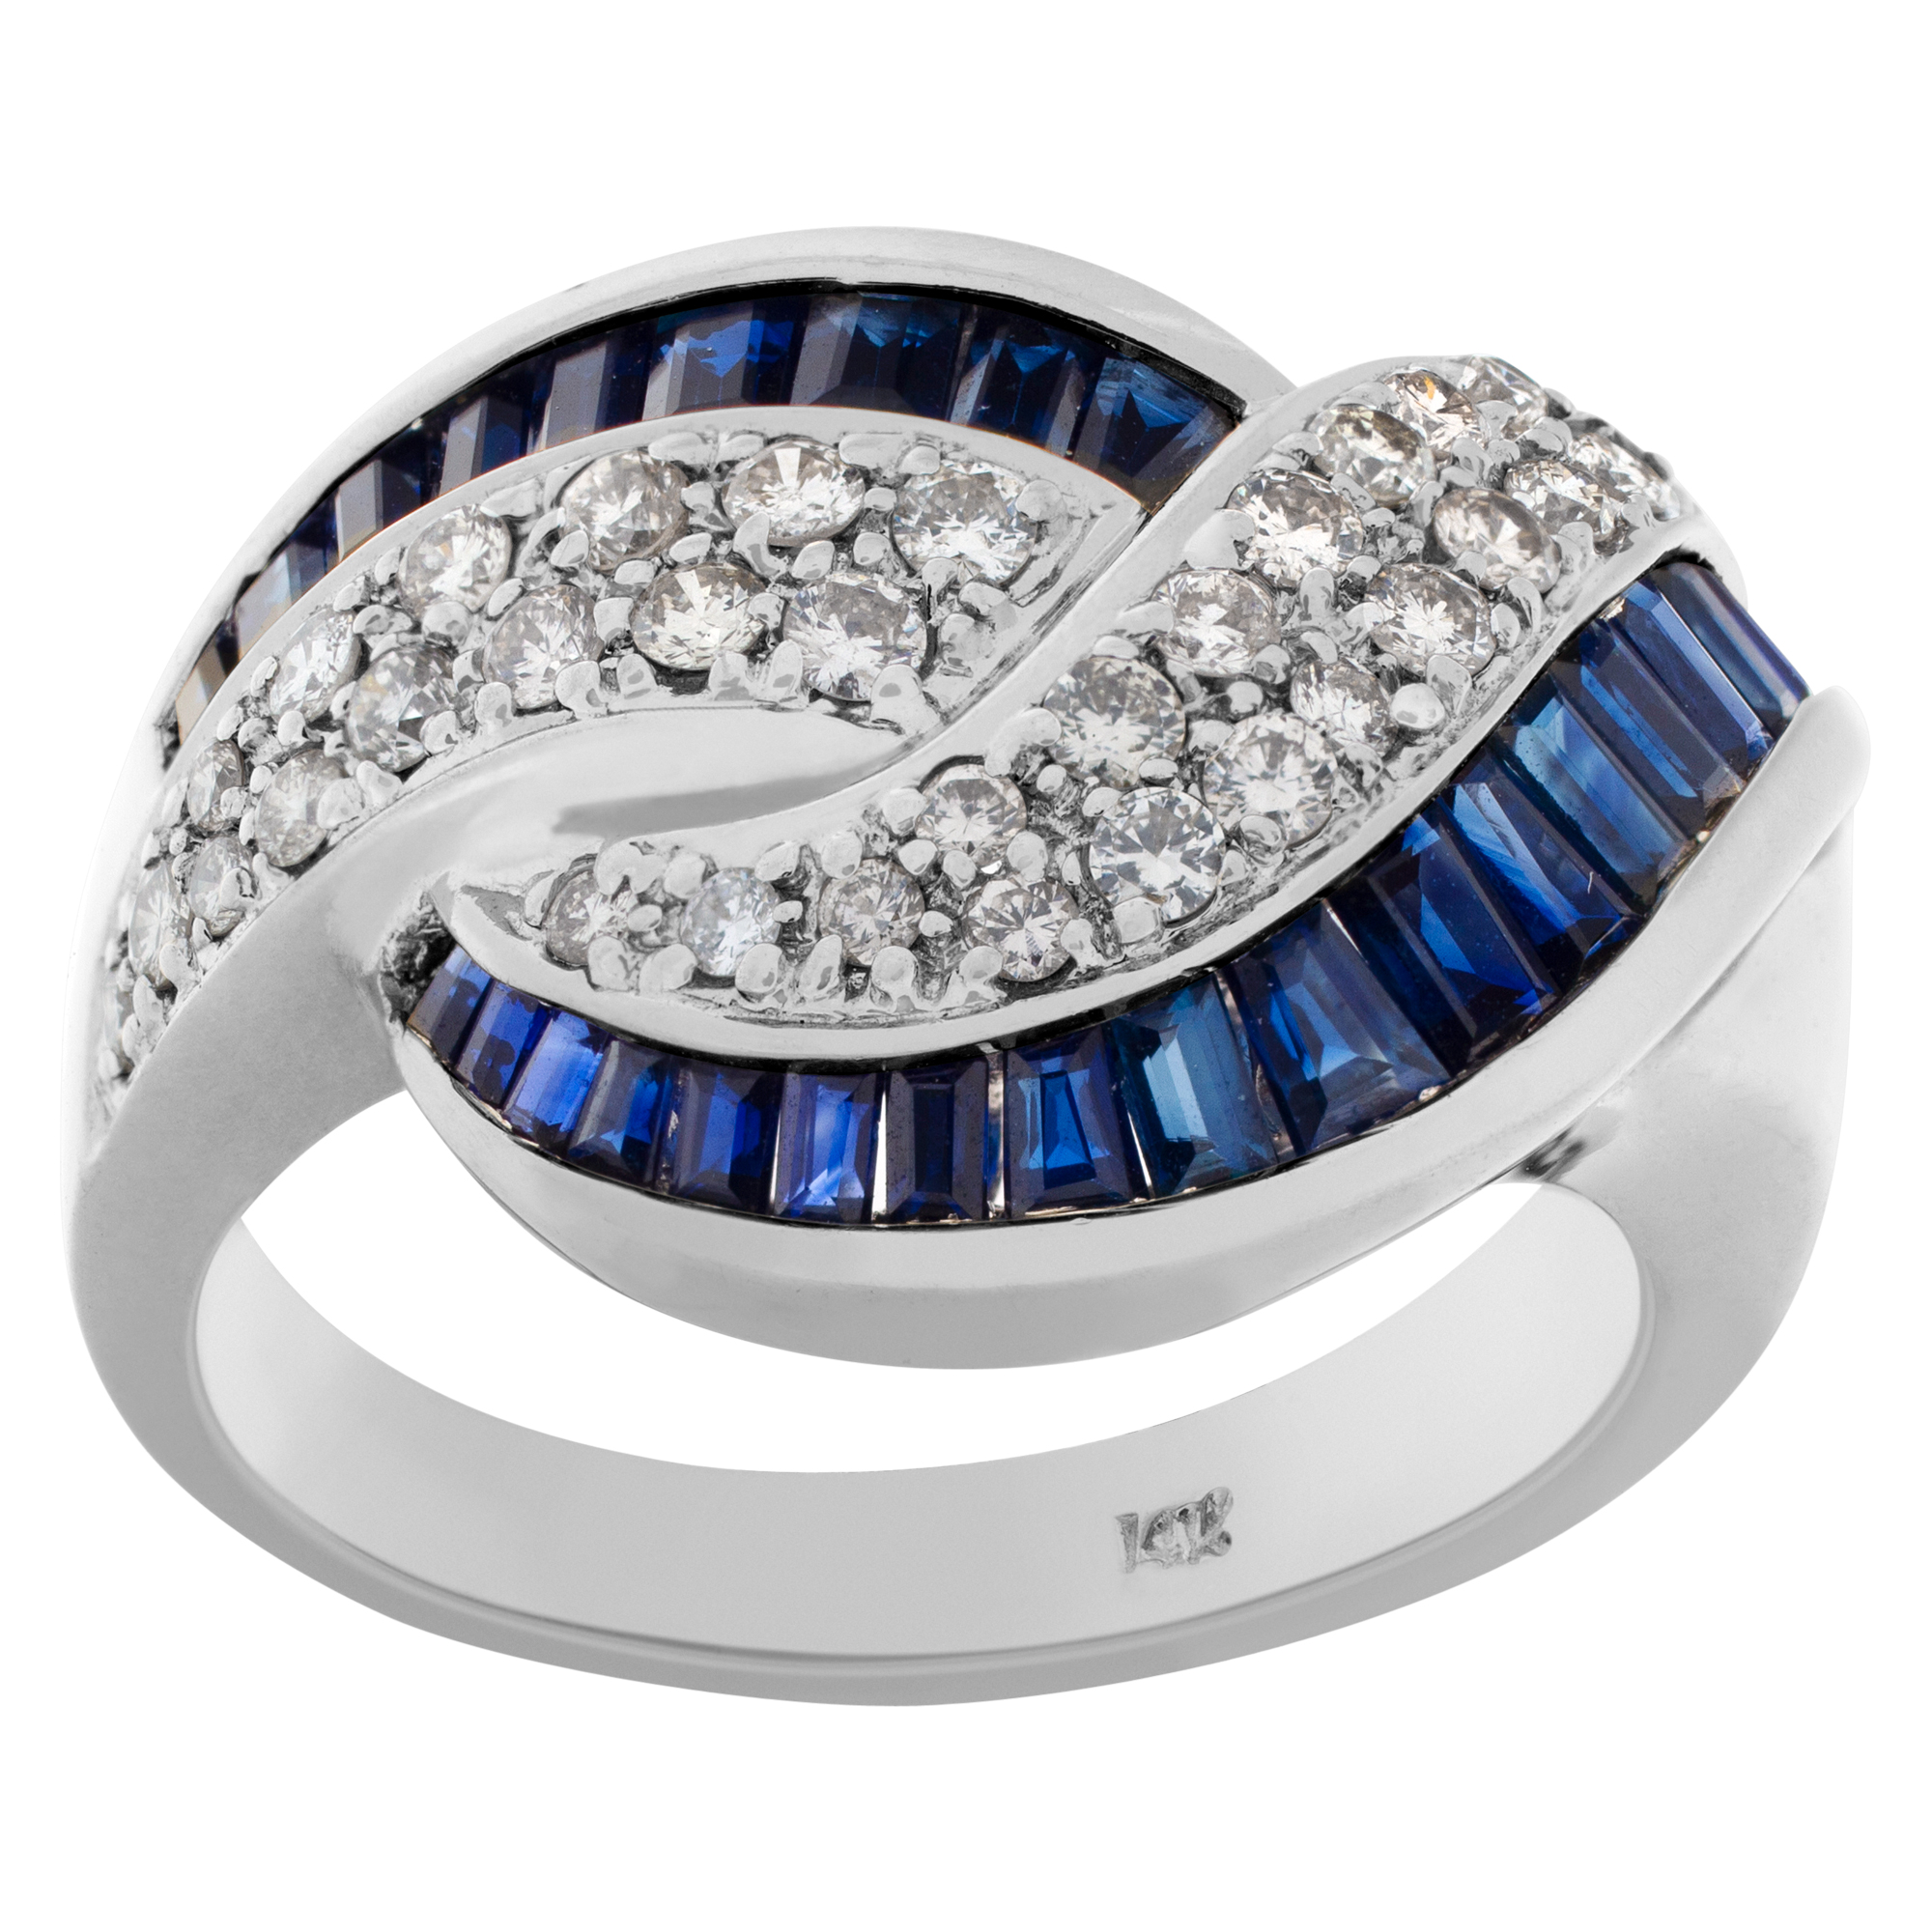 Criss-Cross sapphire & diamond ring in 14K white gold. Approx 1 carat tapered emerald cut sapphire and 0.75 carat full cut round diamond. image 1